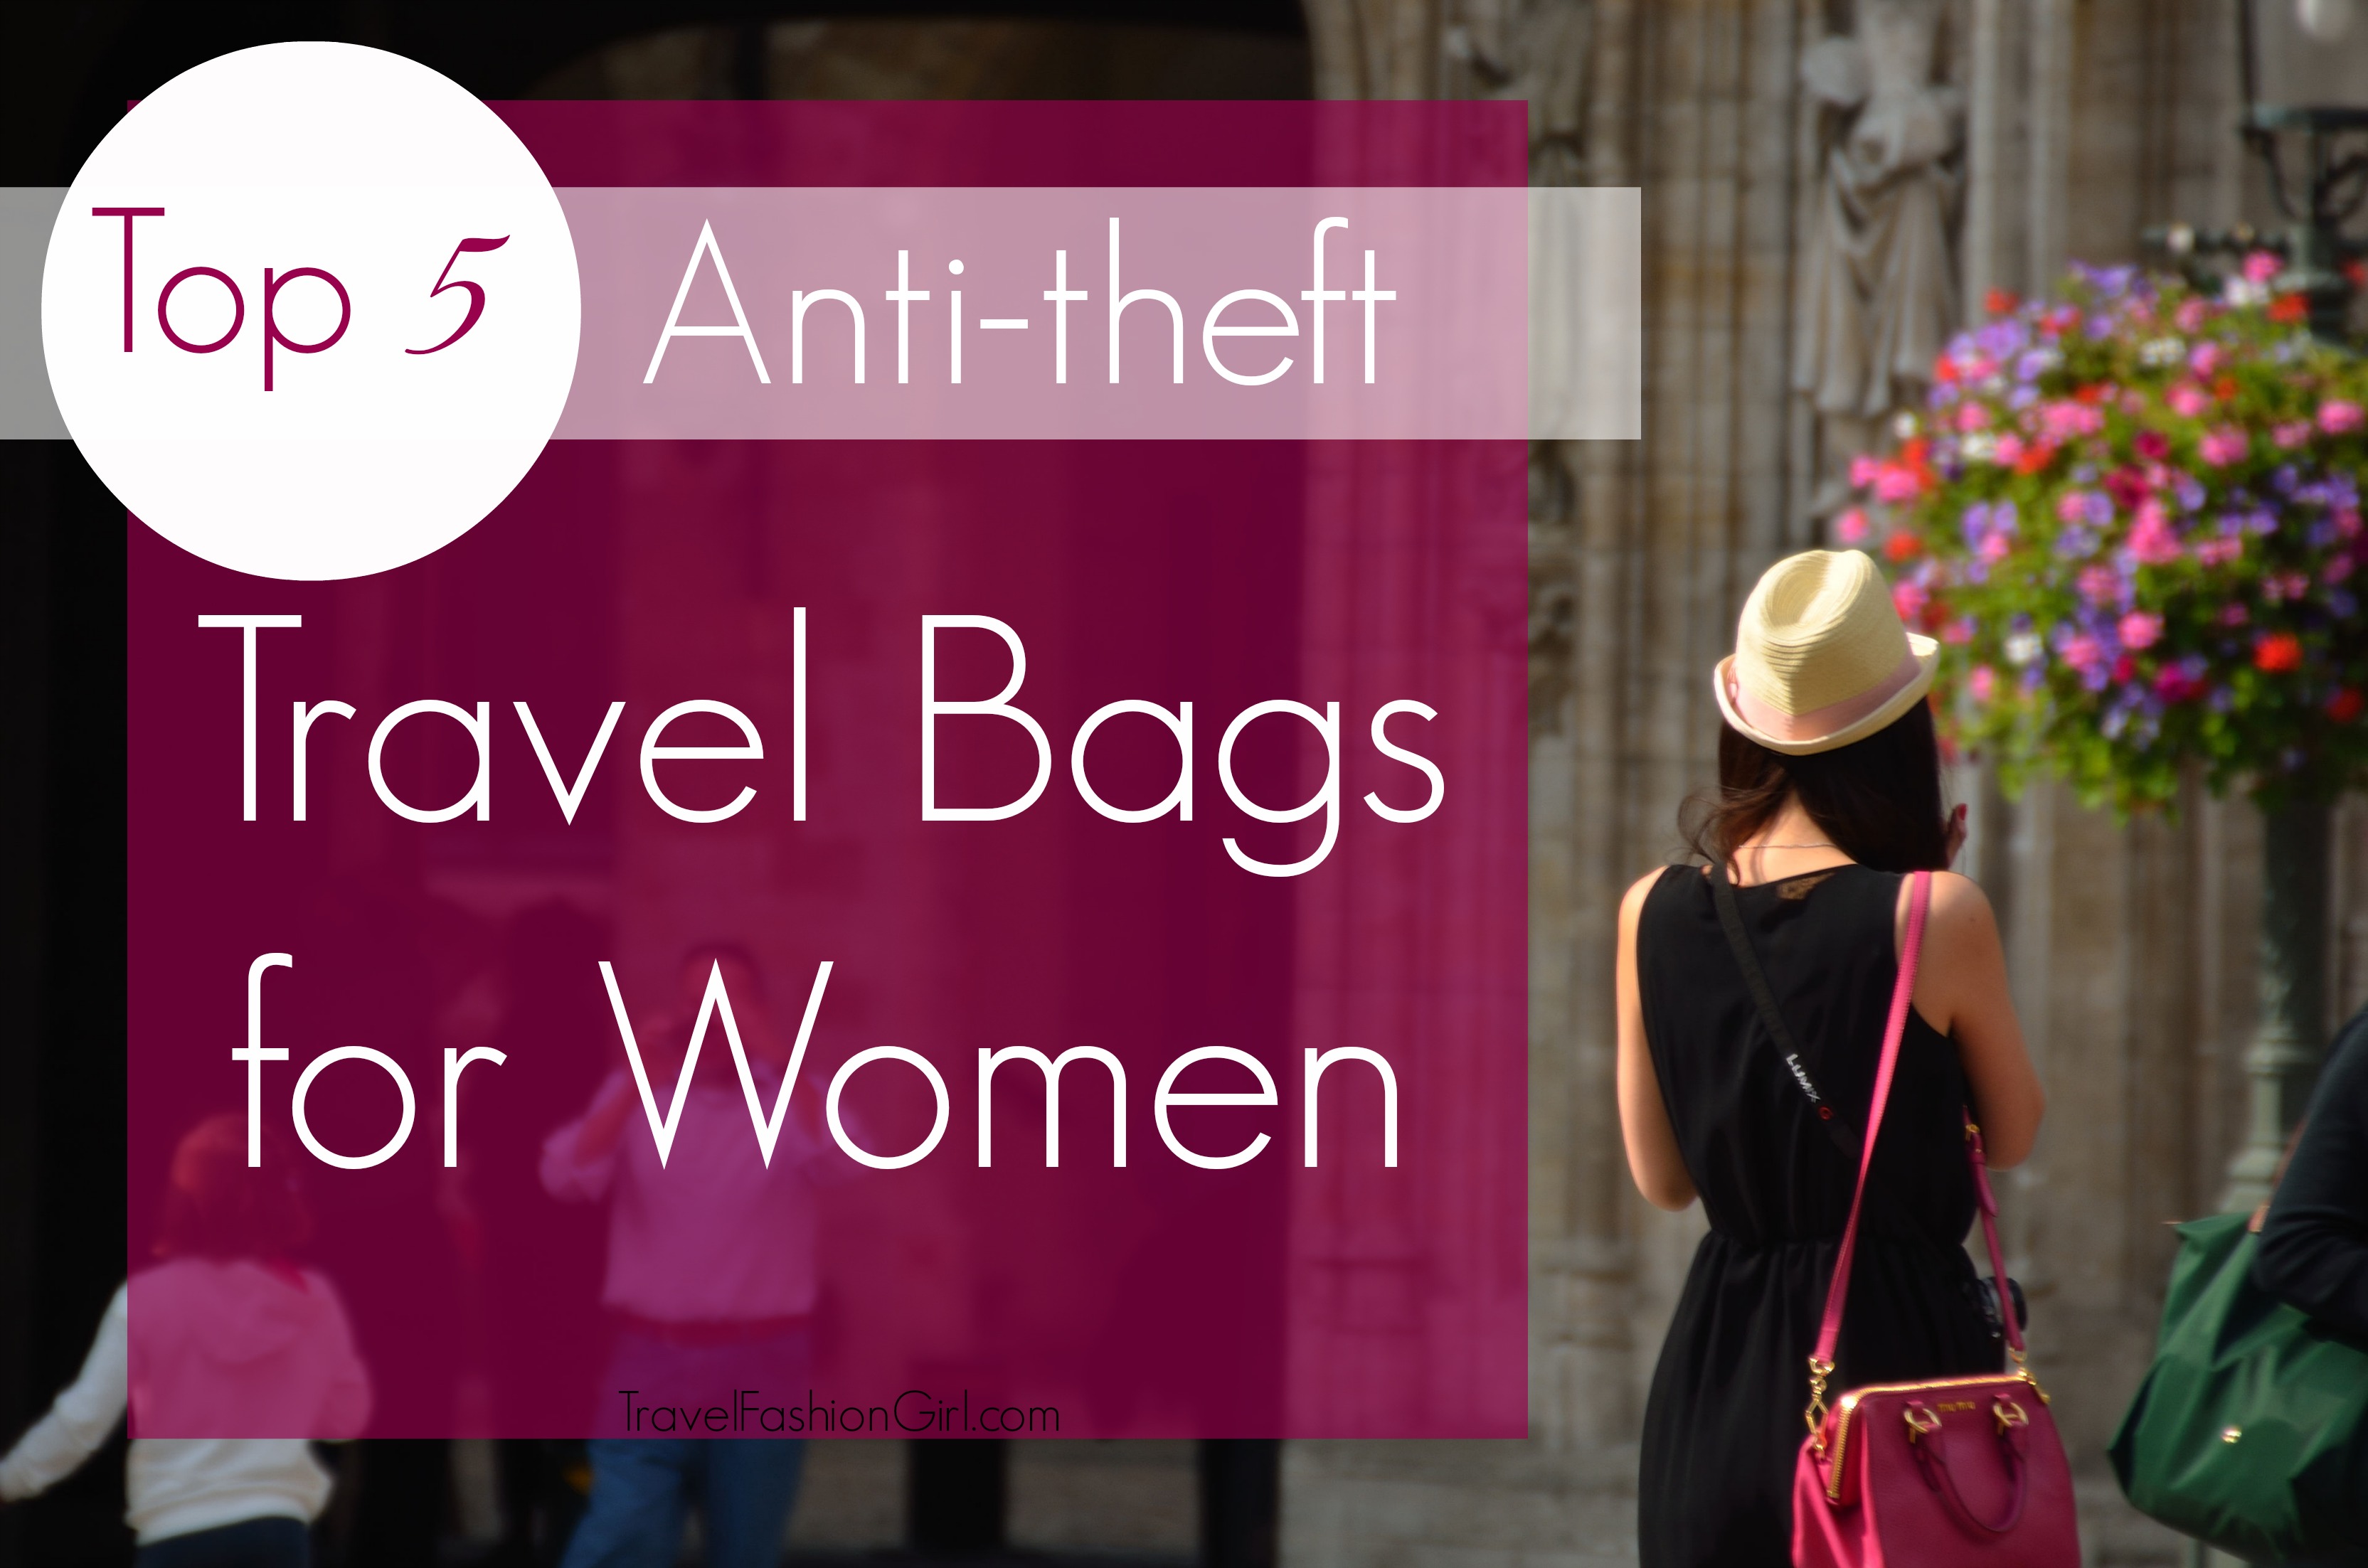 Top 5 Anti-theft Travel Bags for Women - Best Sellers!